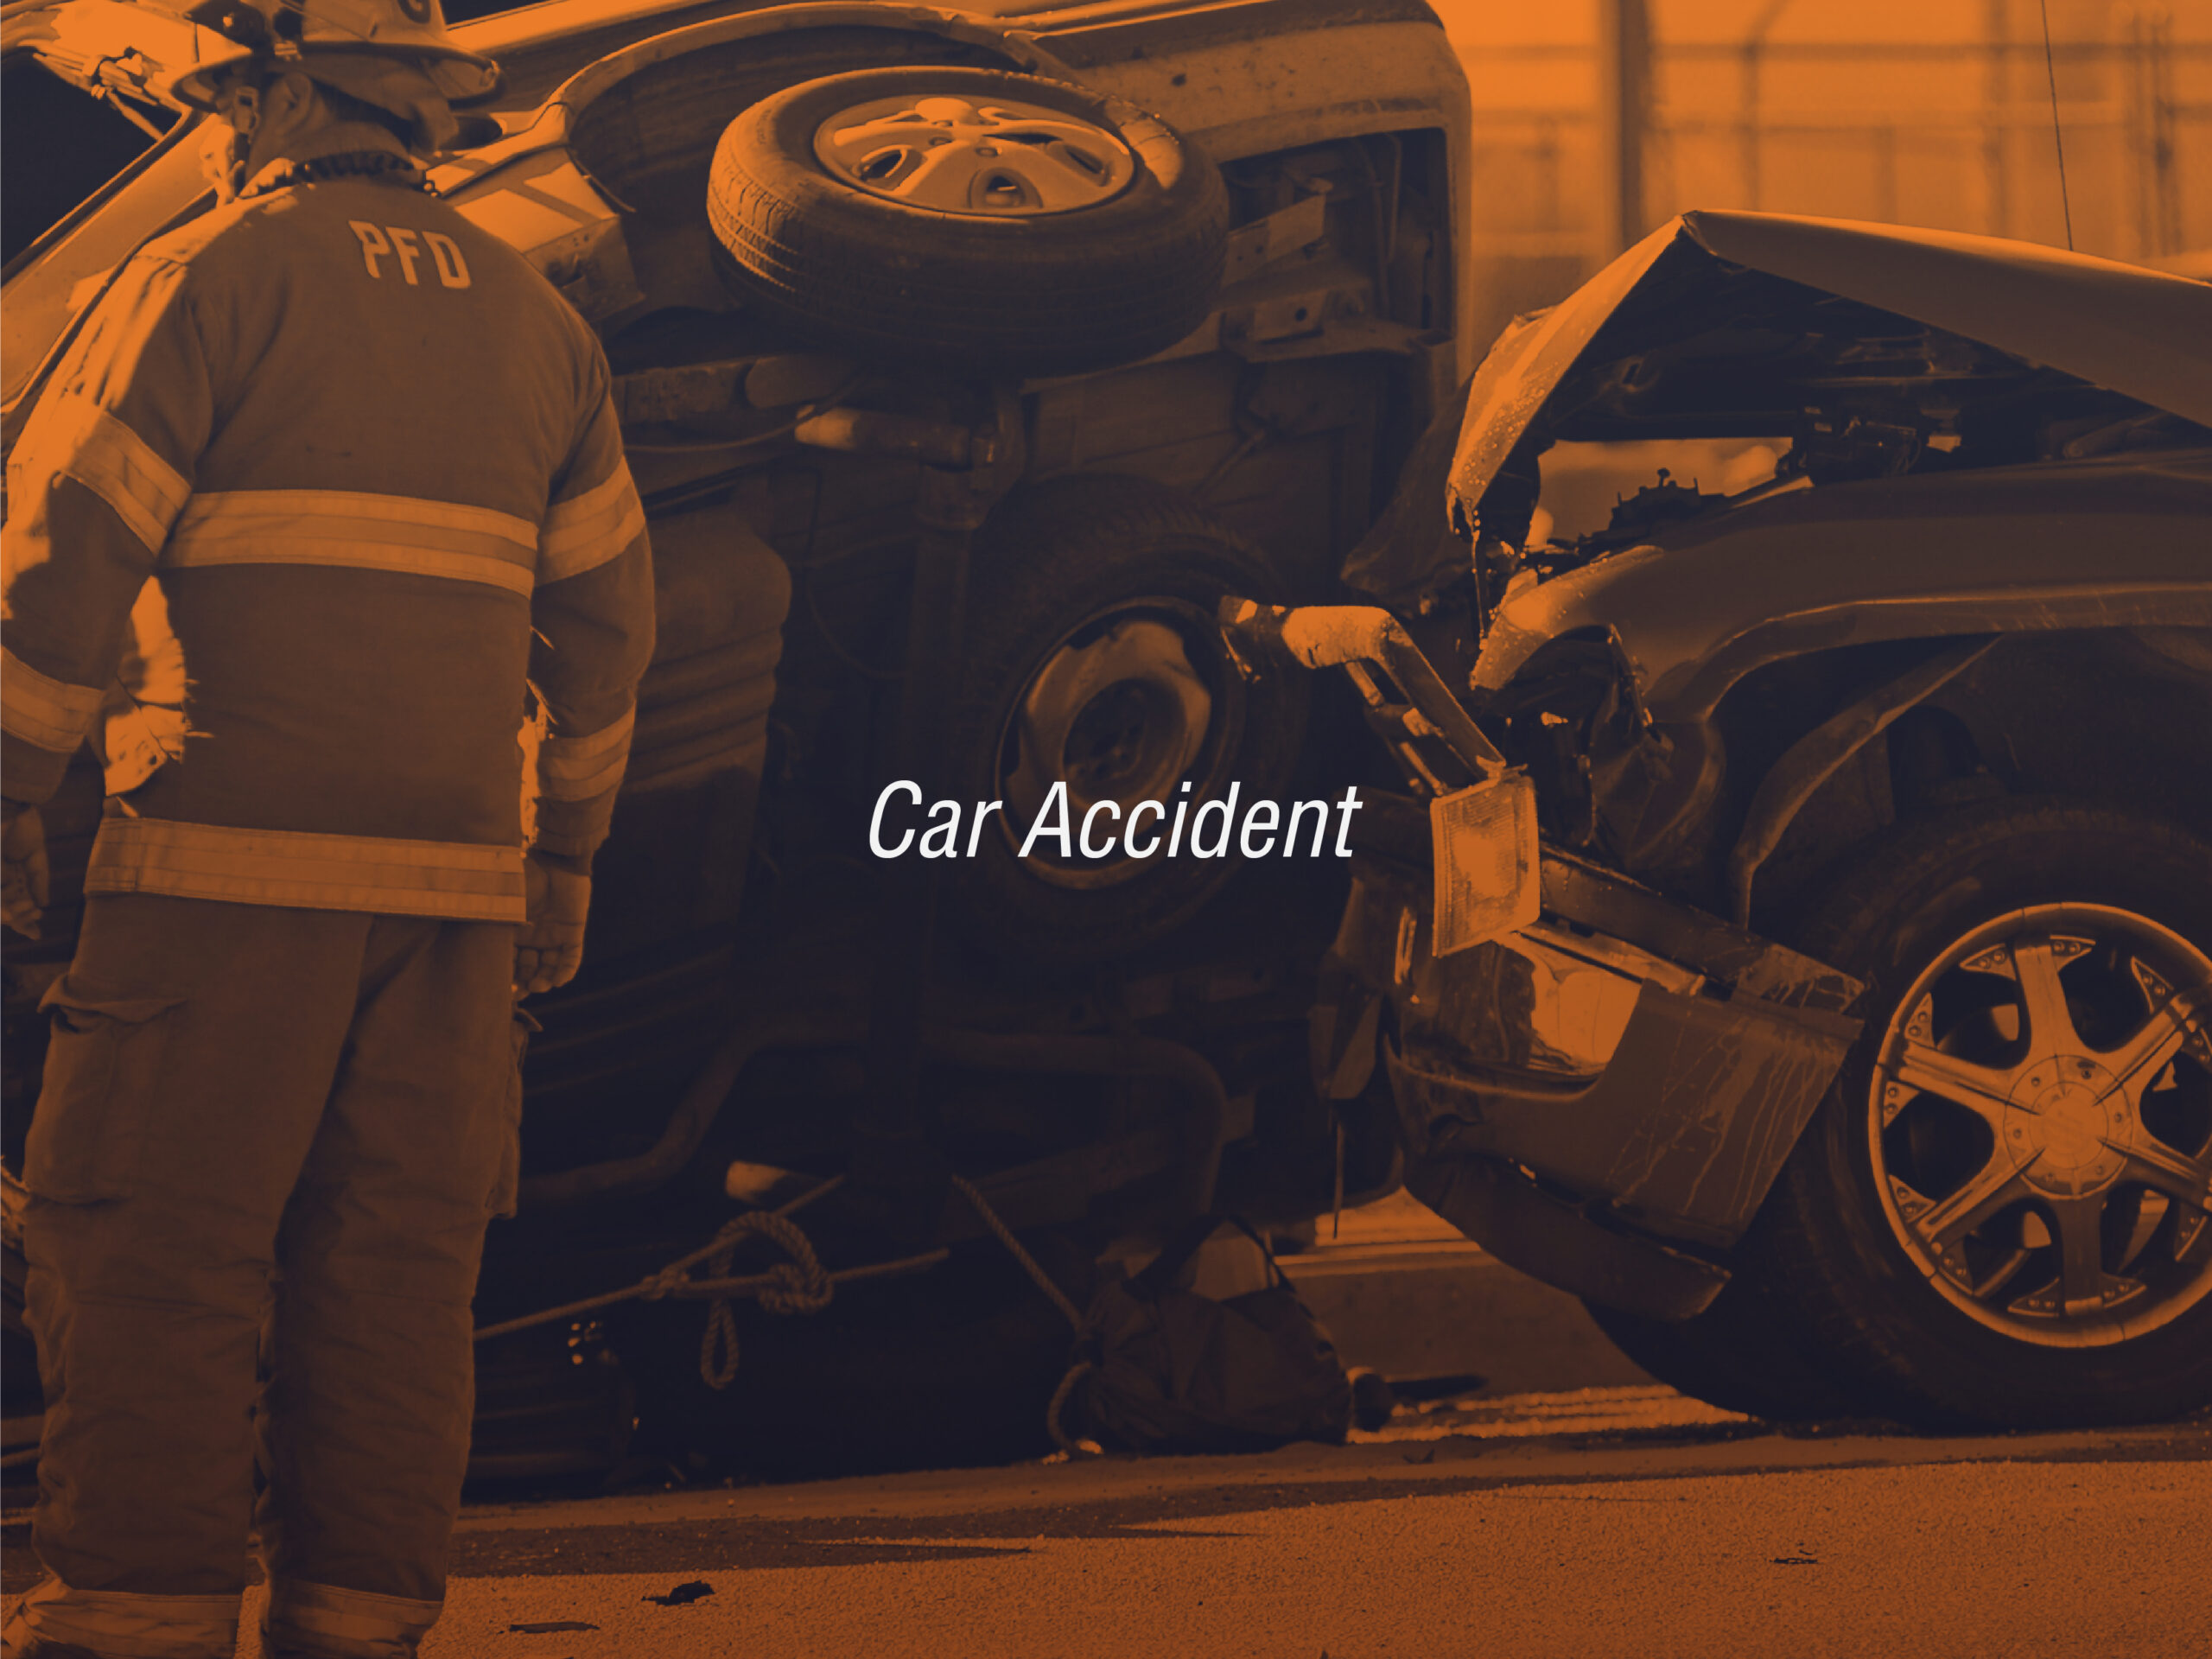 Leading causes of car accidents in Los Angeles